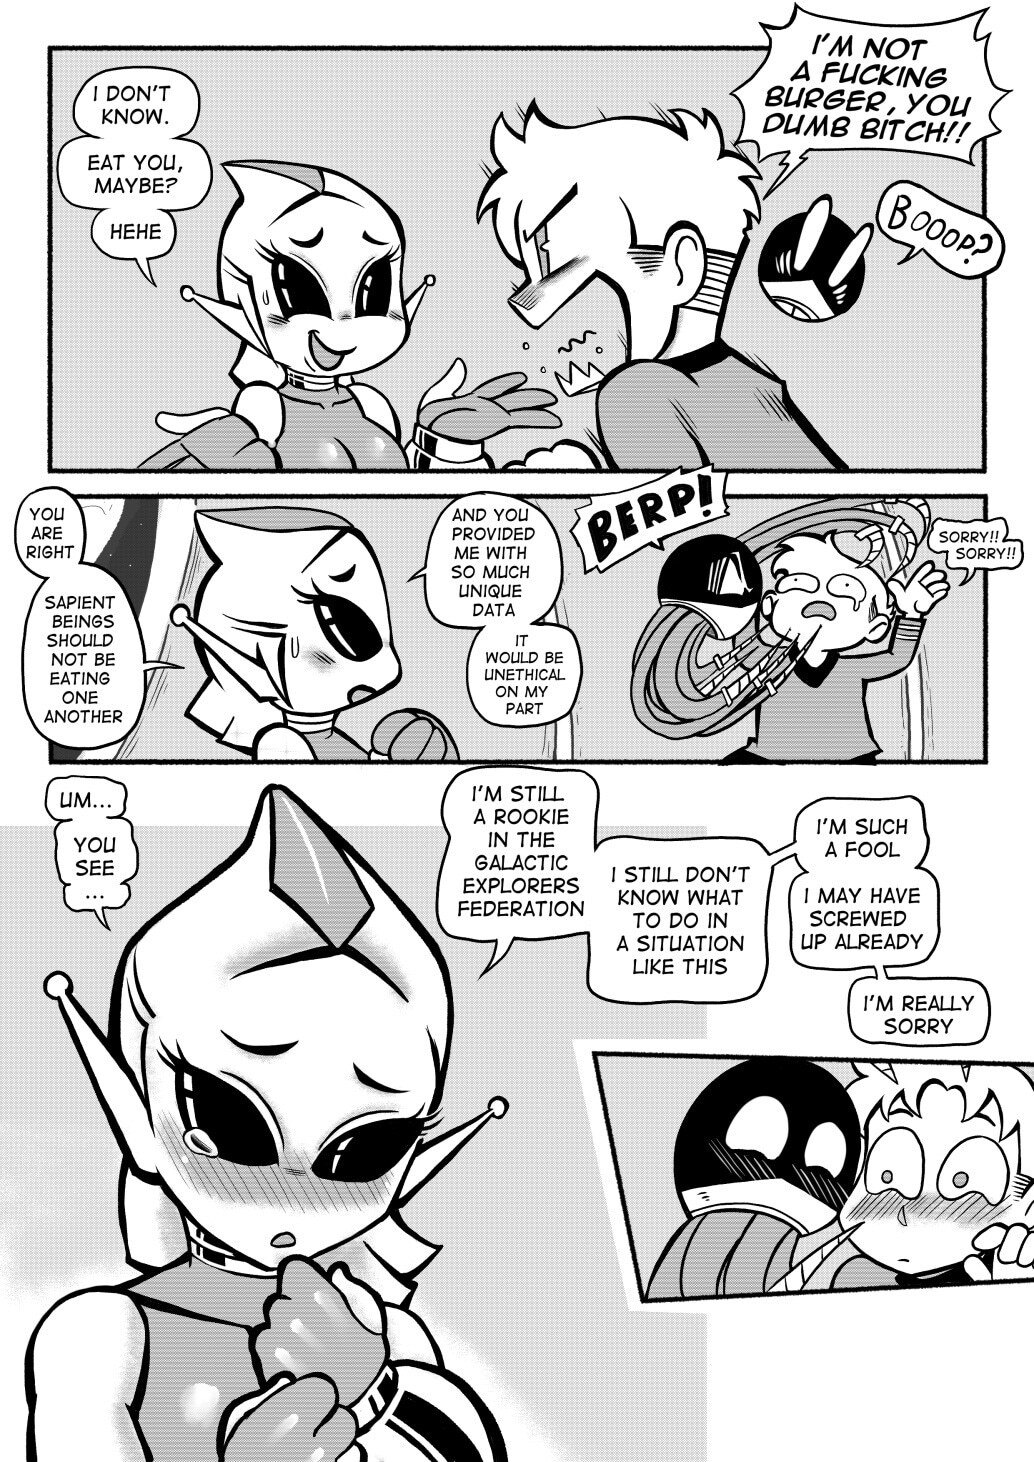 Abducted! - Mr.E - Page 10